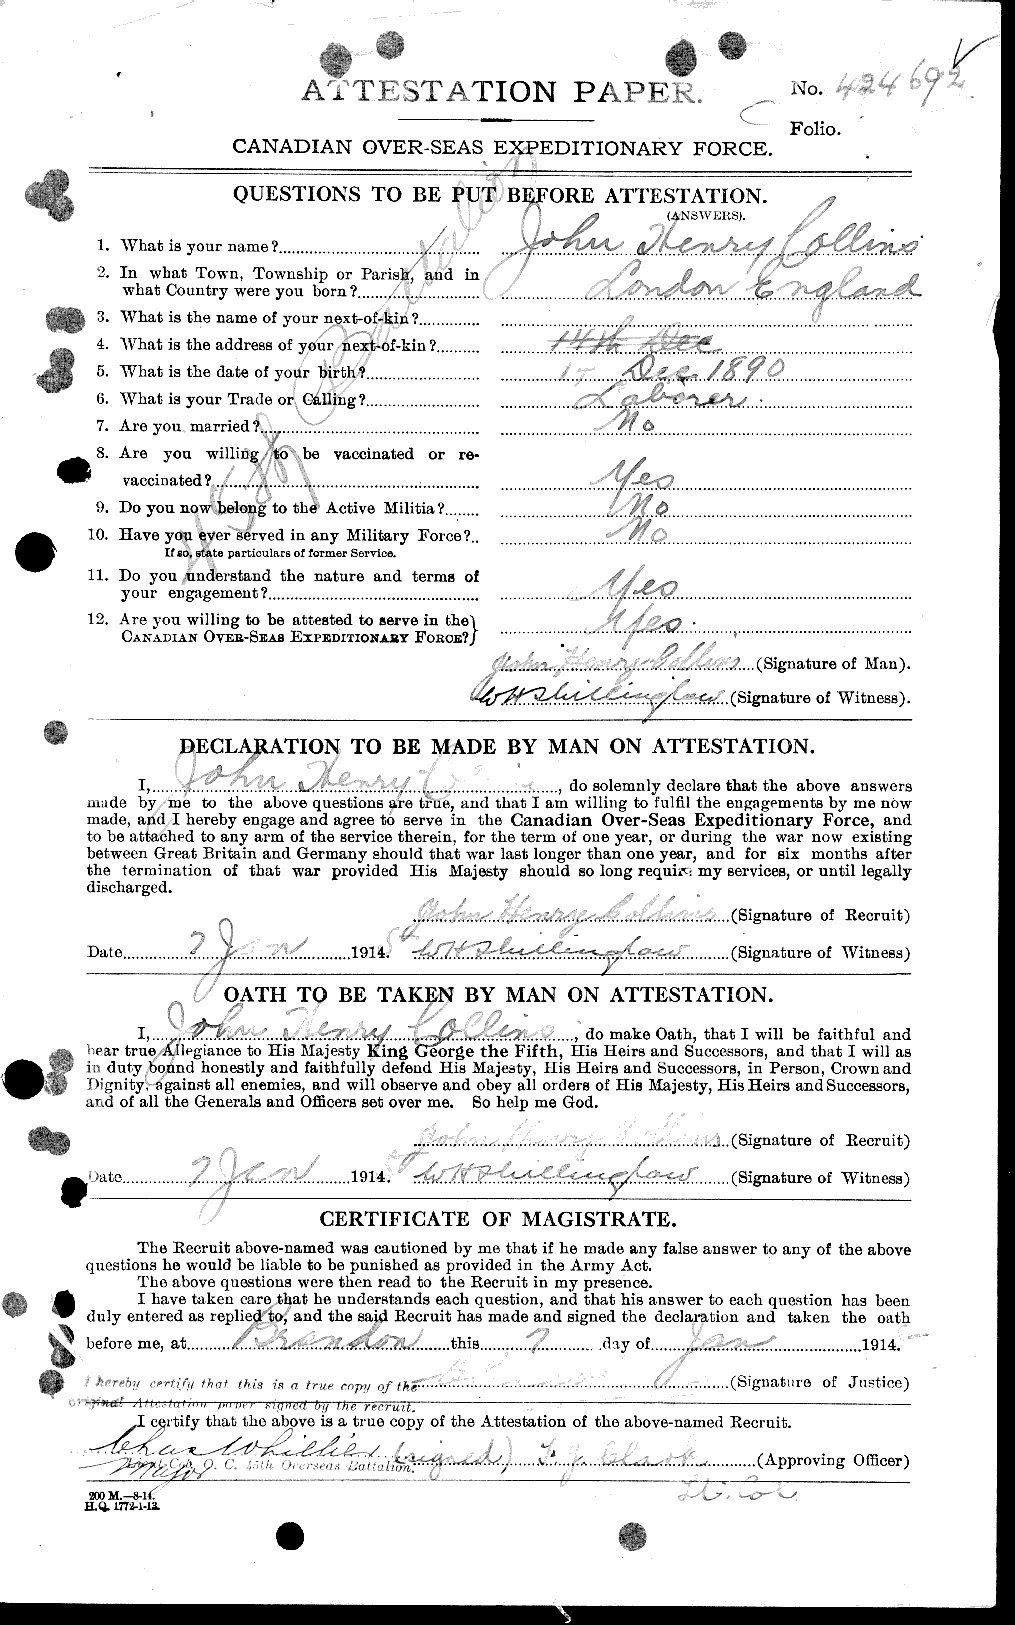 Personnel Records of the First World War - CEF 034357a